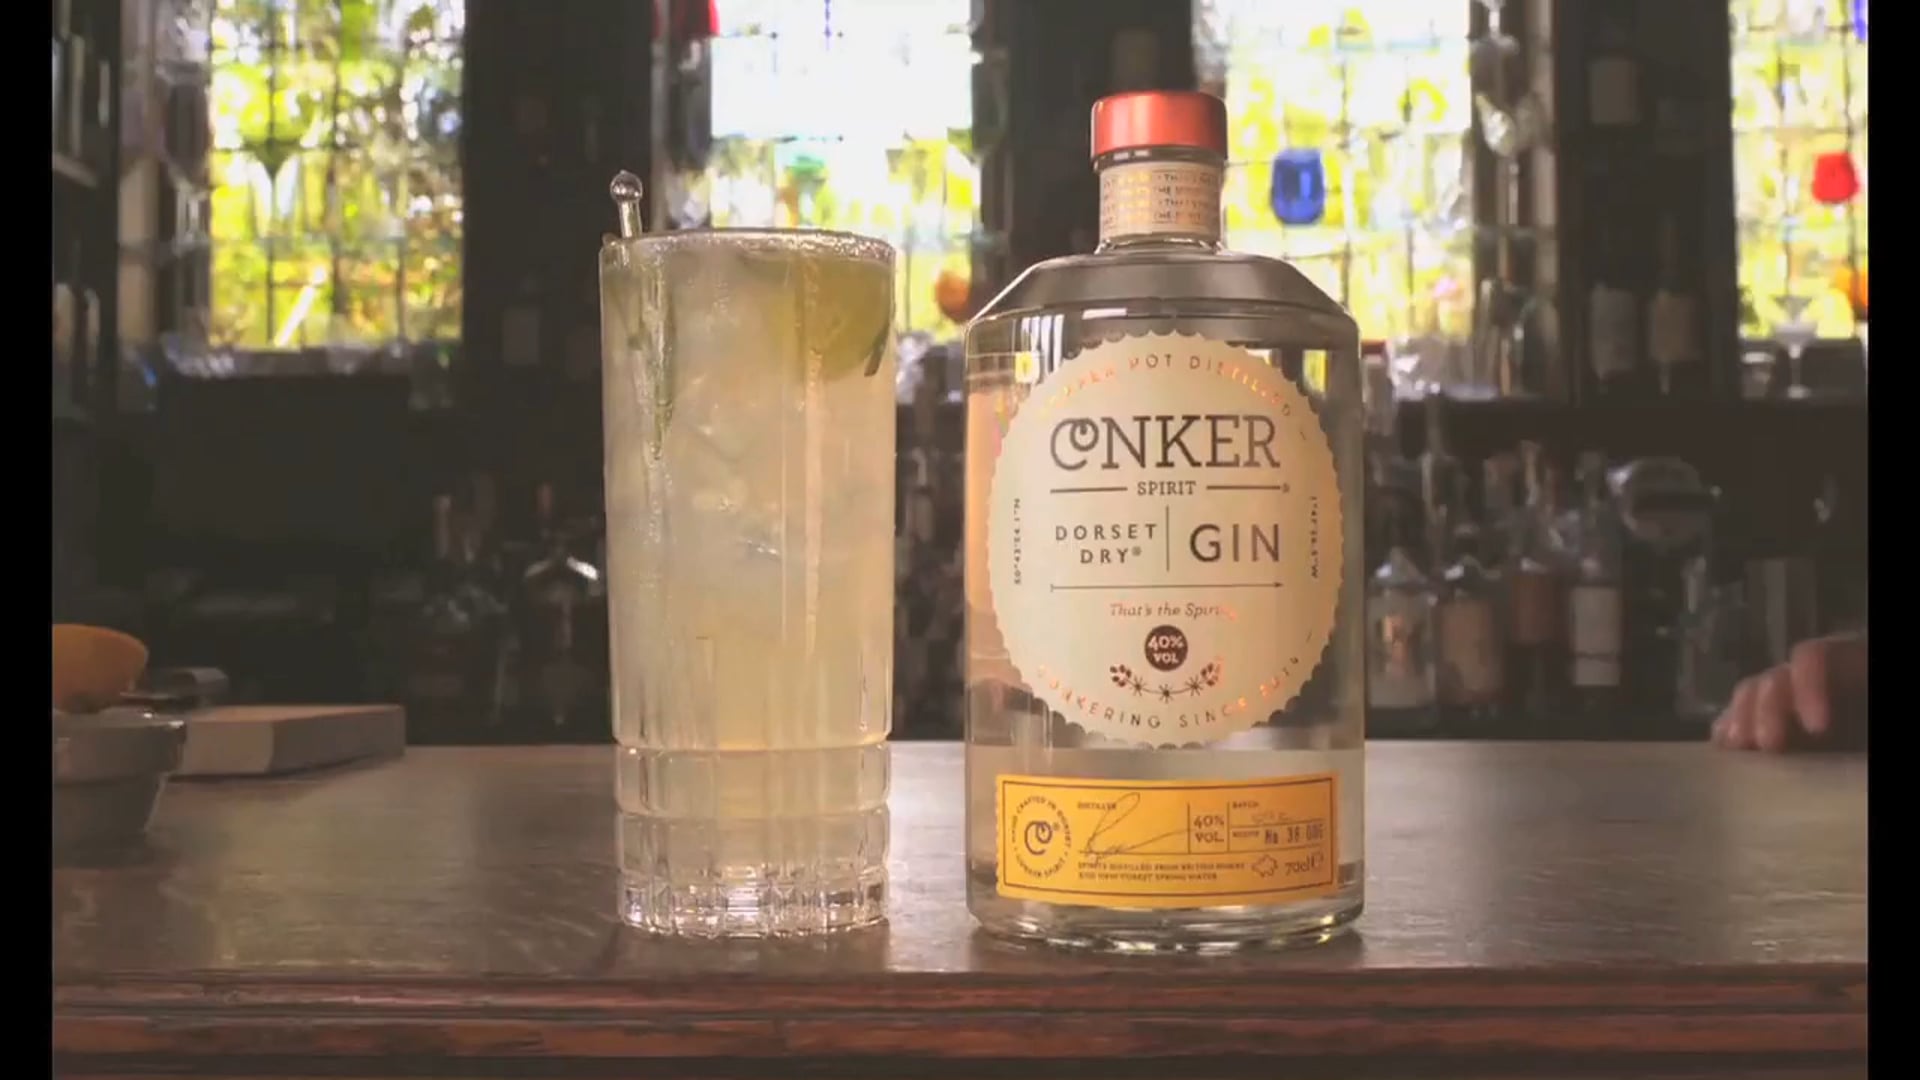 ONLY THE FOLEY - #7 Conker's Gin